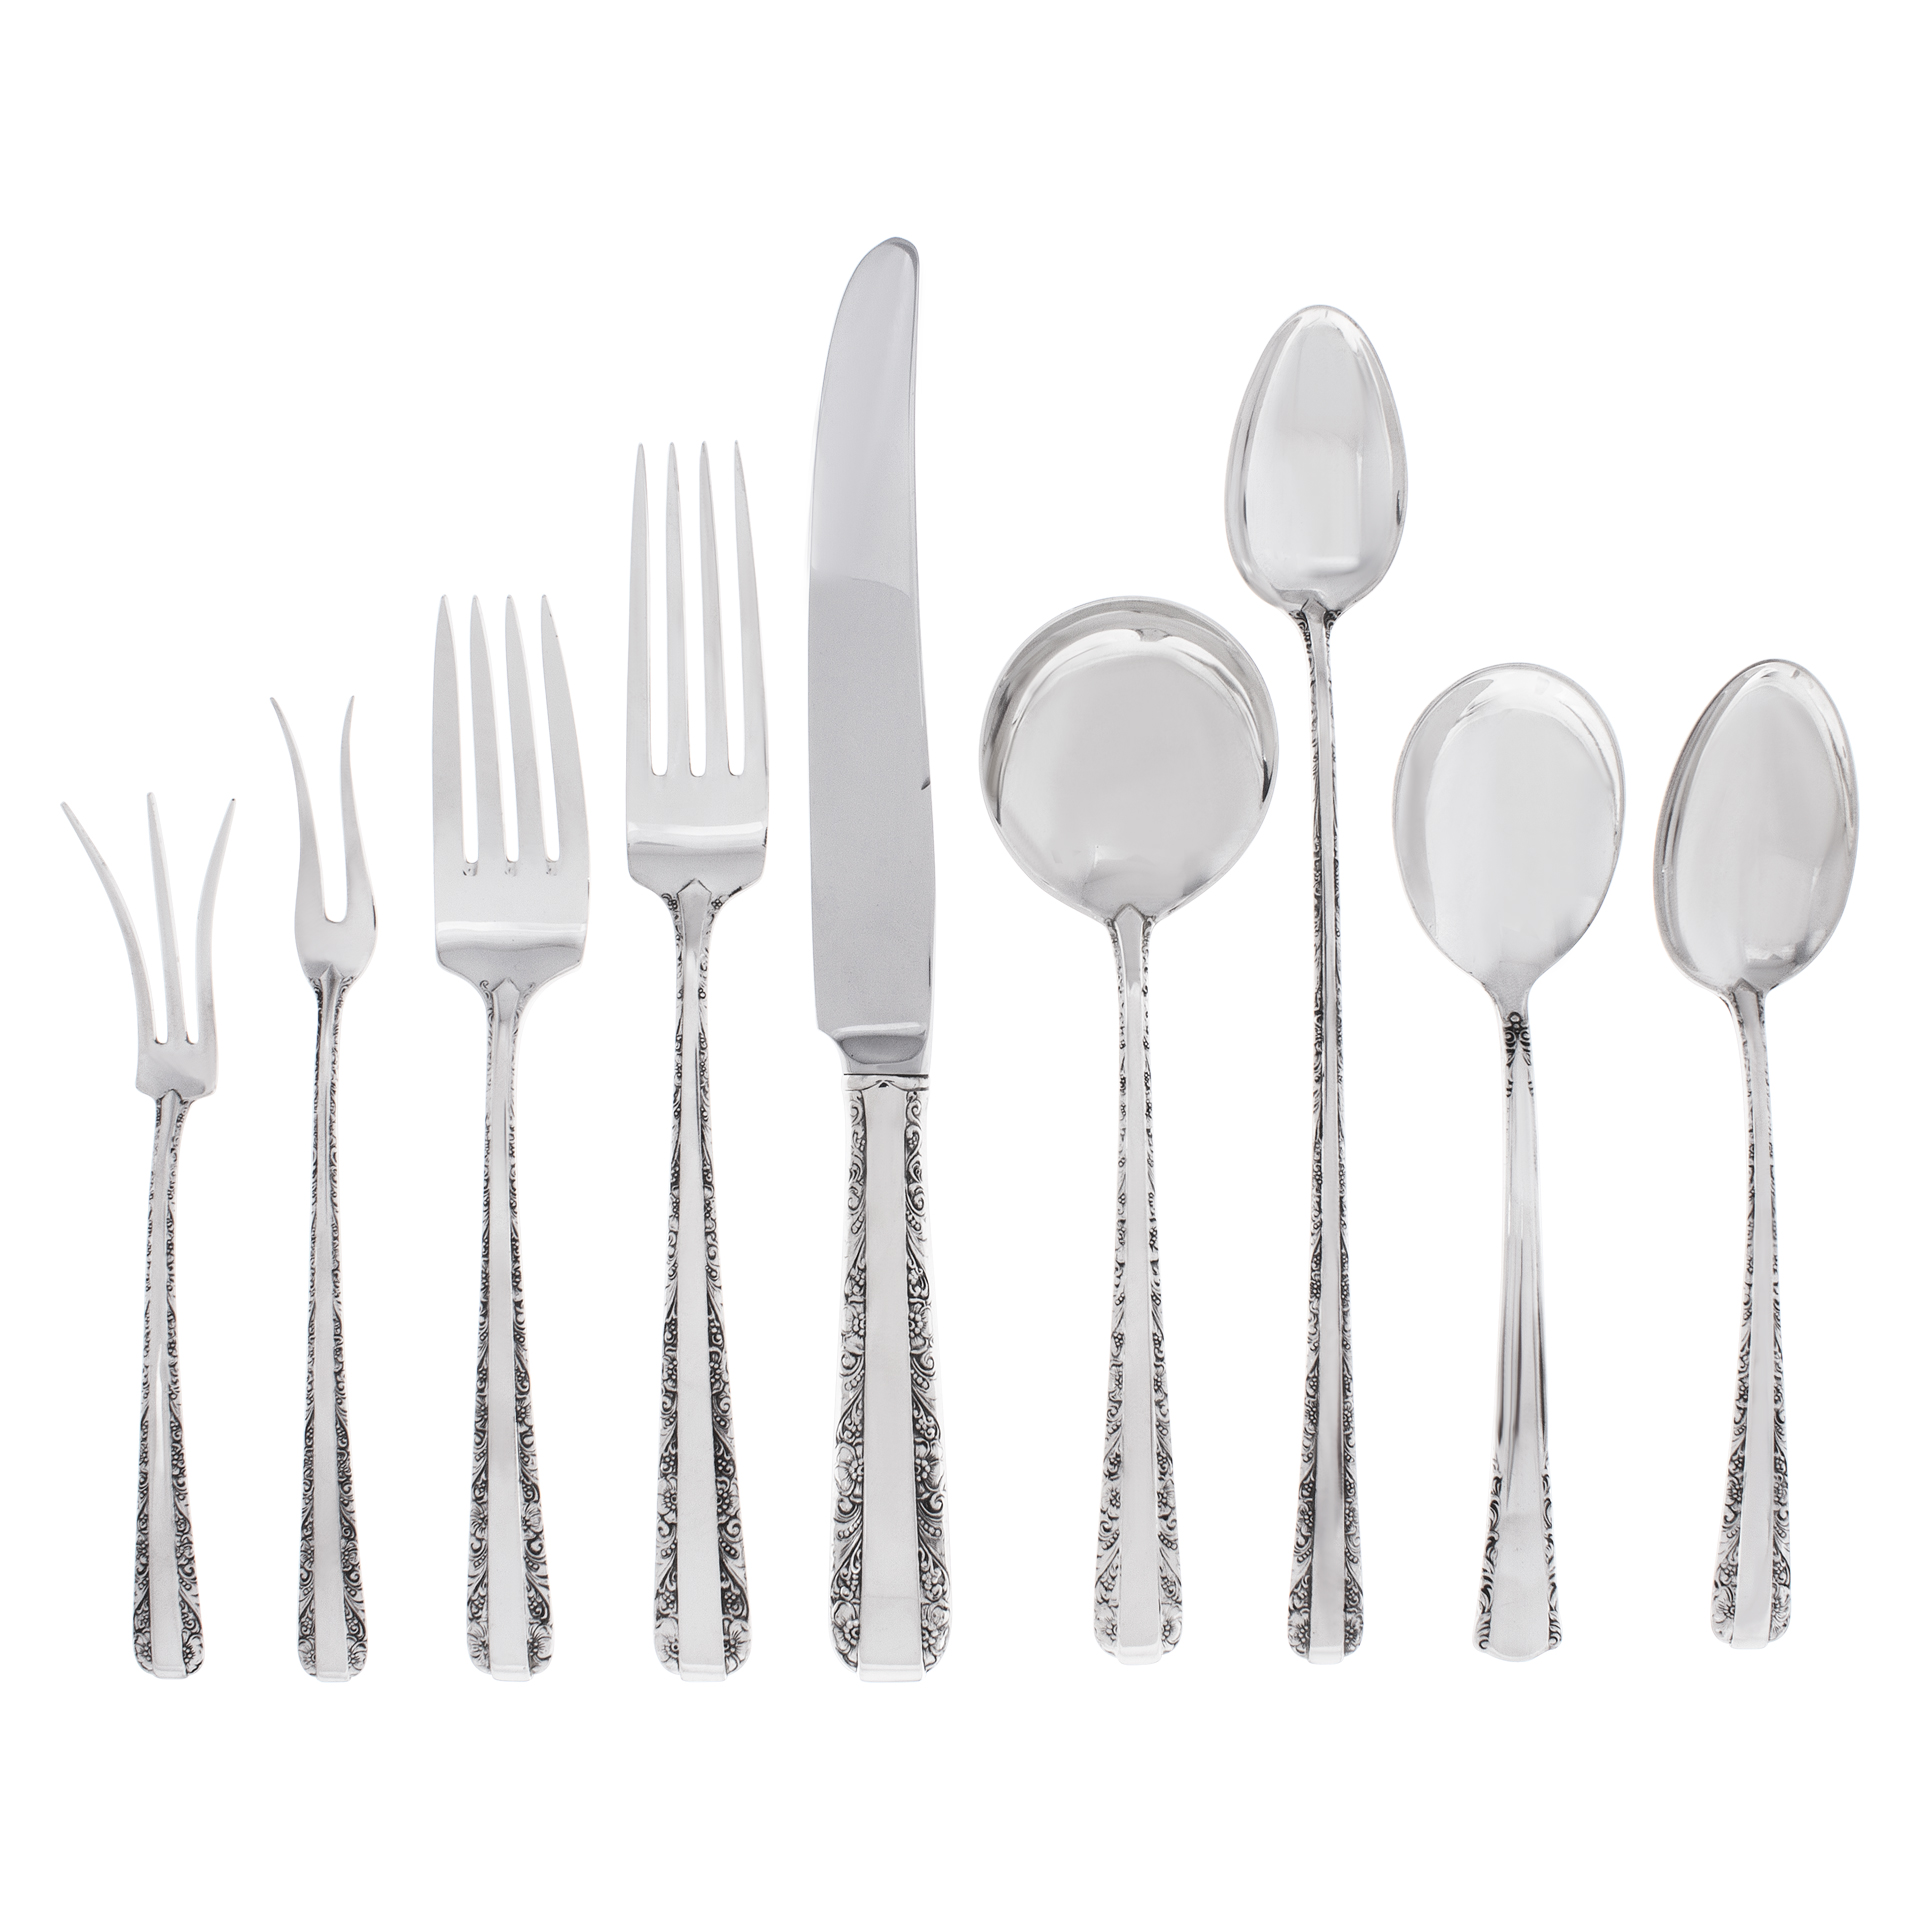 CANDLELIGHT sterling silver flatware set patented In 1934 By Towle Silversmiths. 62 pieces total-  5 Place setting for 8 + 5 soup spoon, and 9 serving pieces. Over 1800 grams sterling silver. image 1